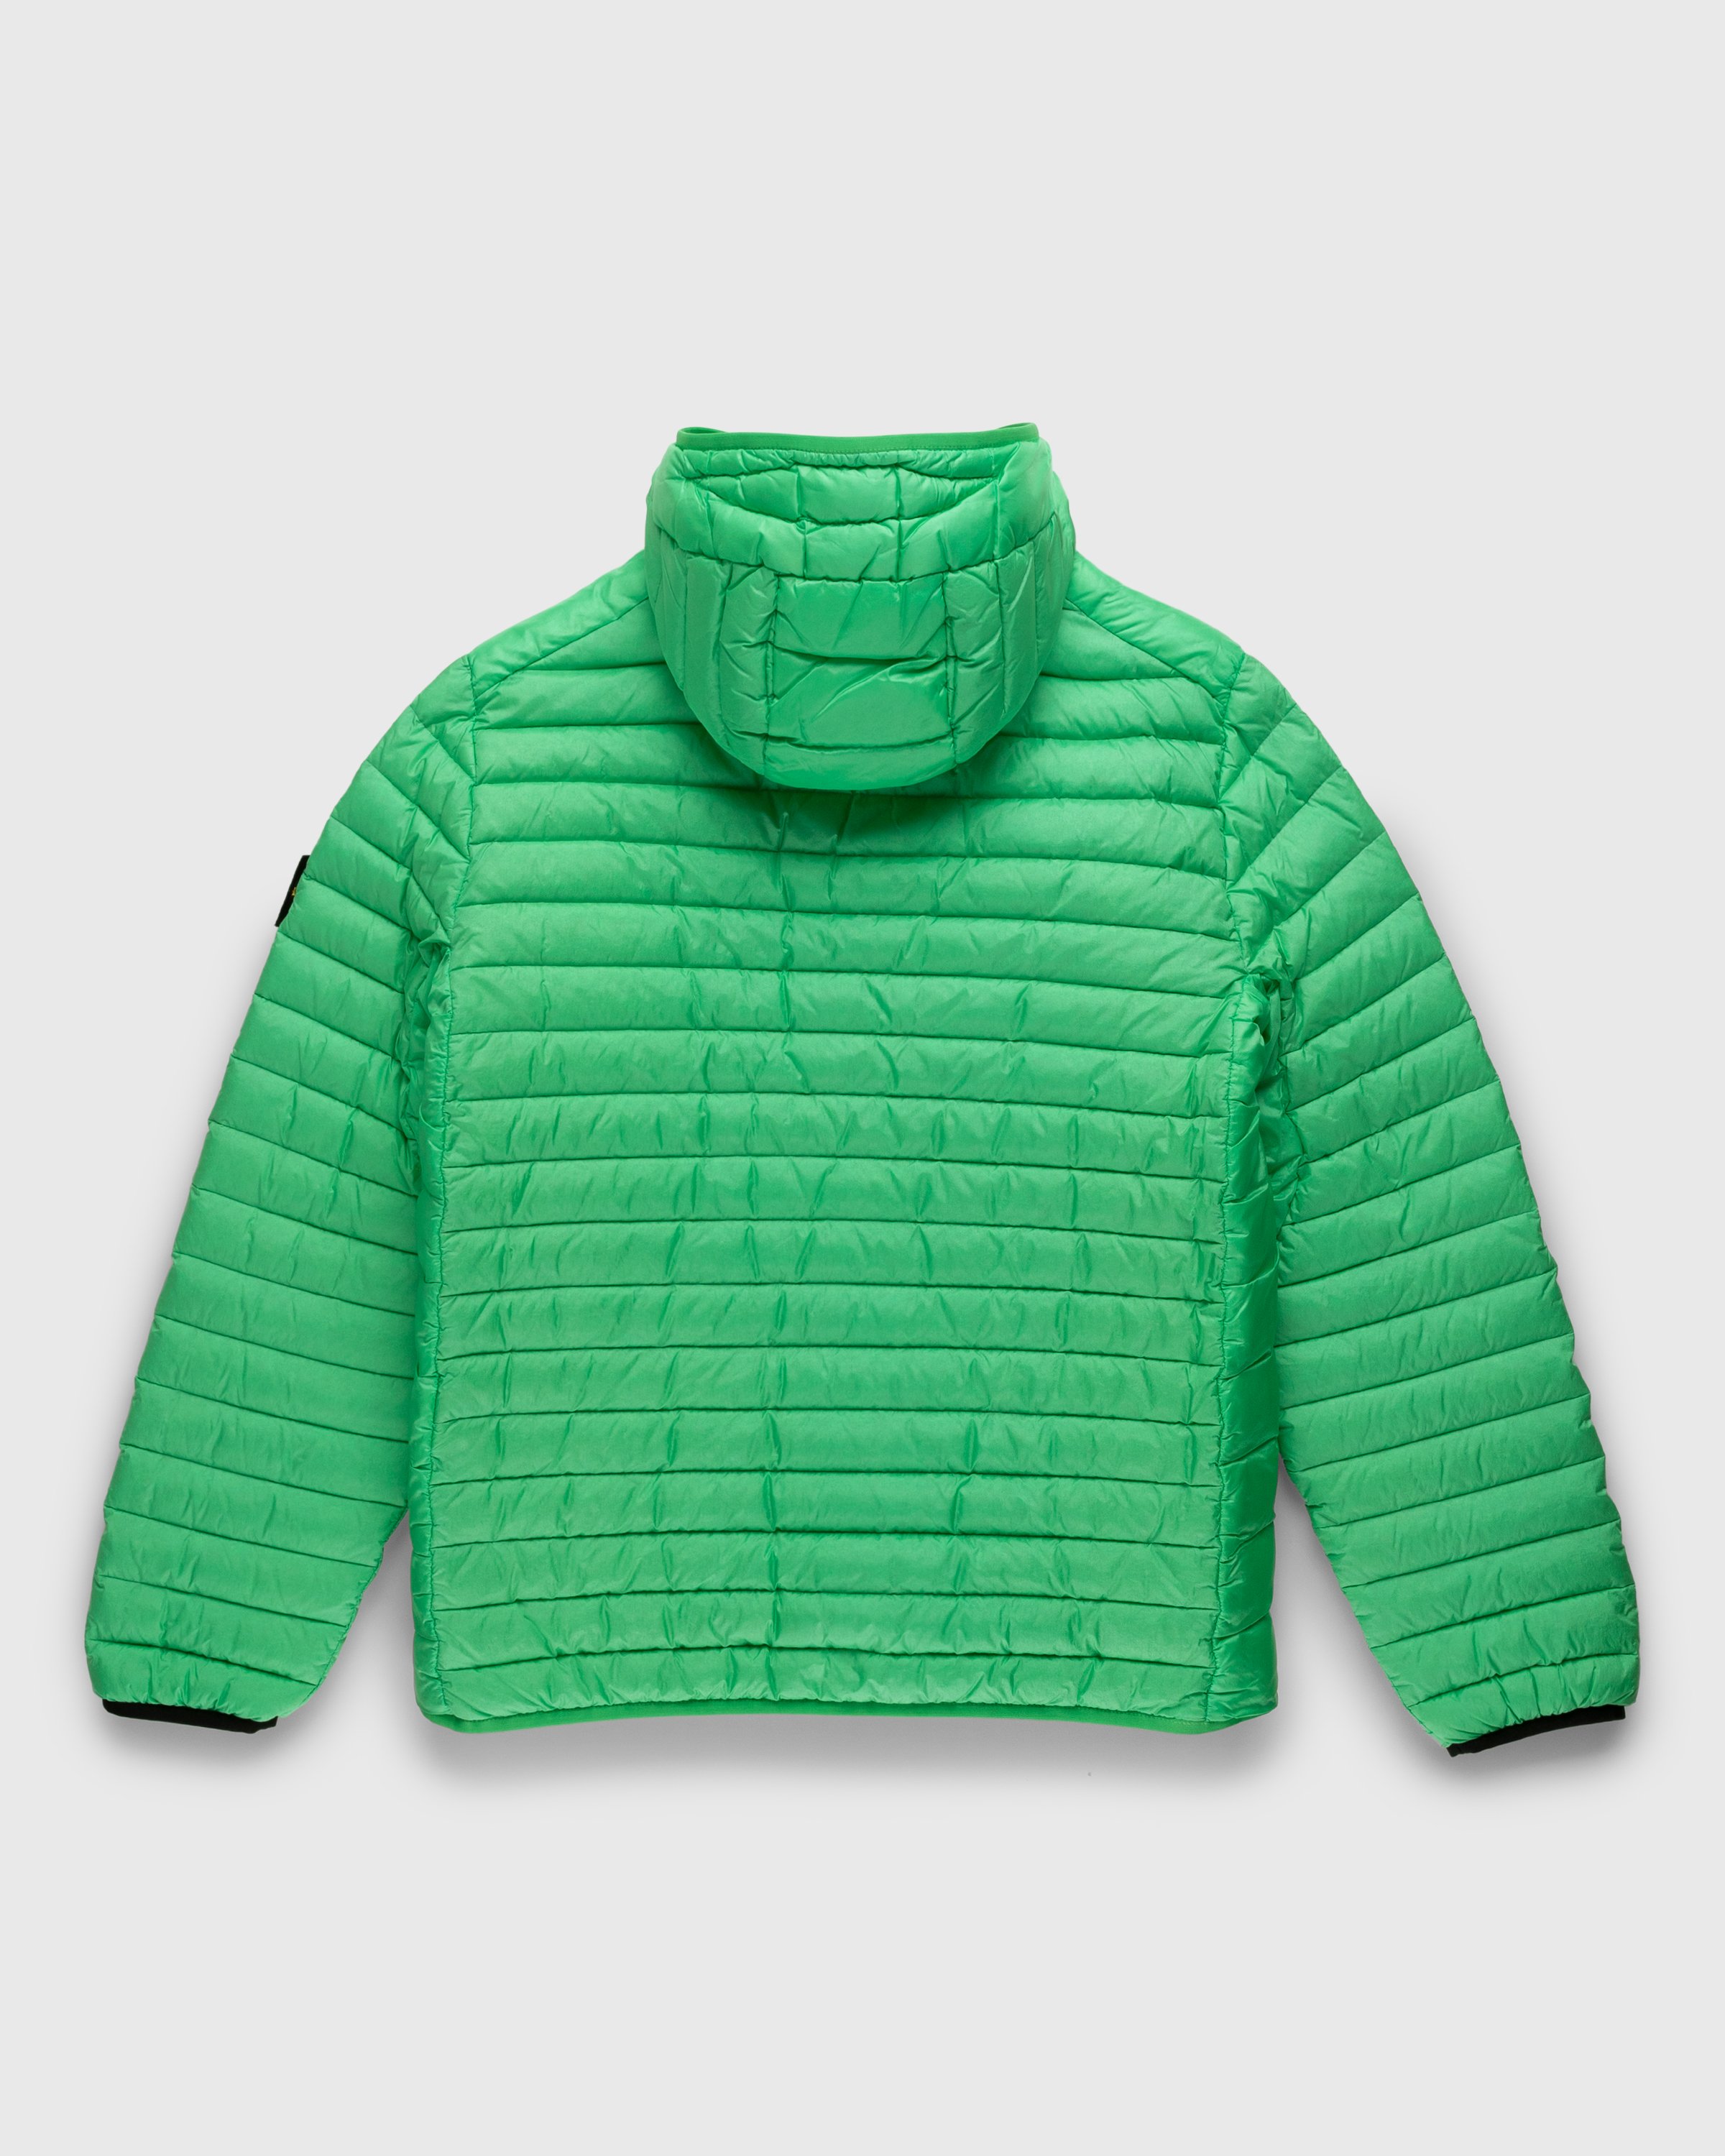 Stone Island - Packable Down Jacket Light Green - Clothing - Green - Image 2